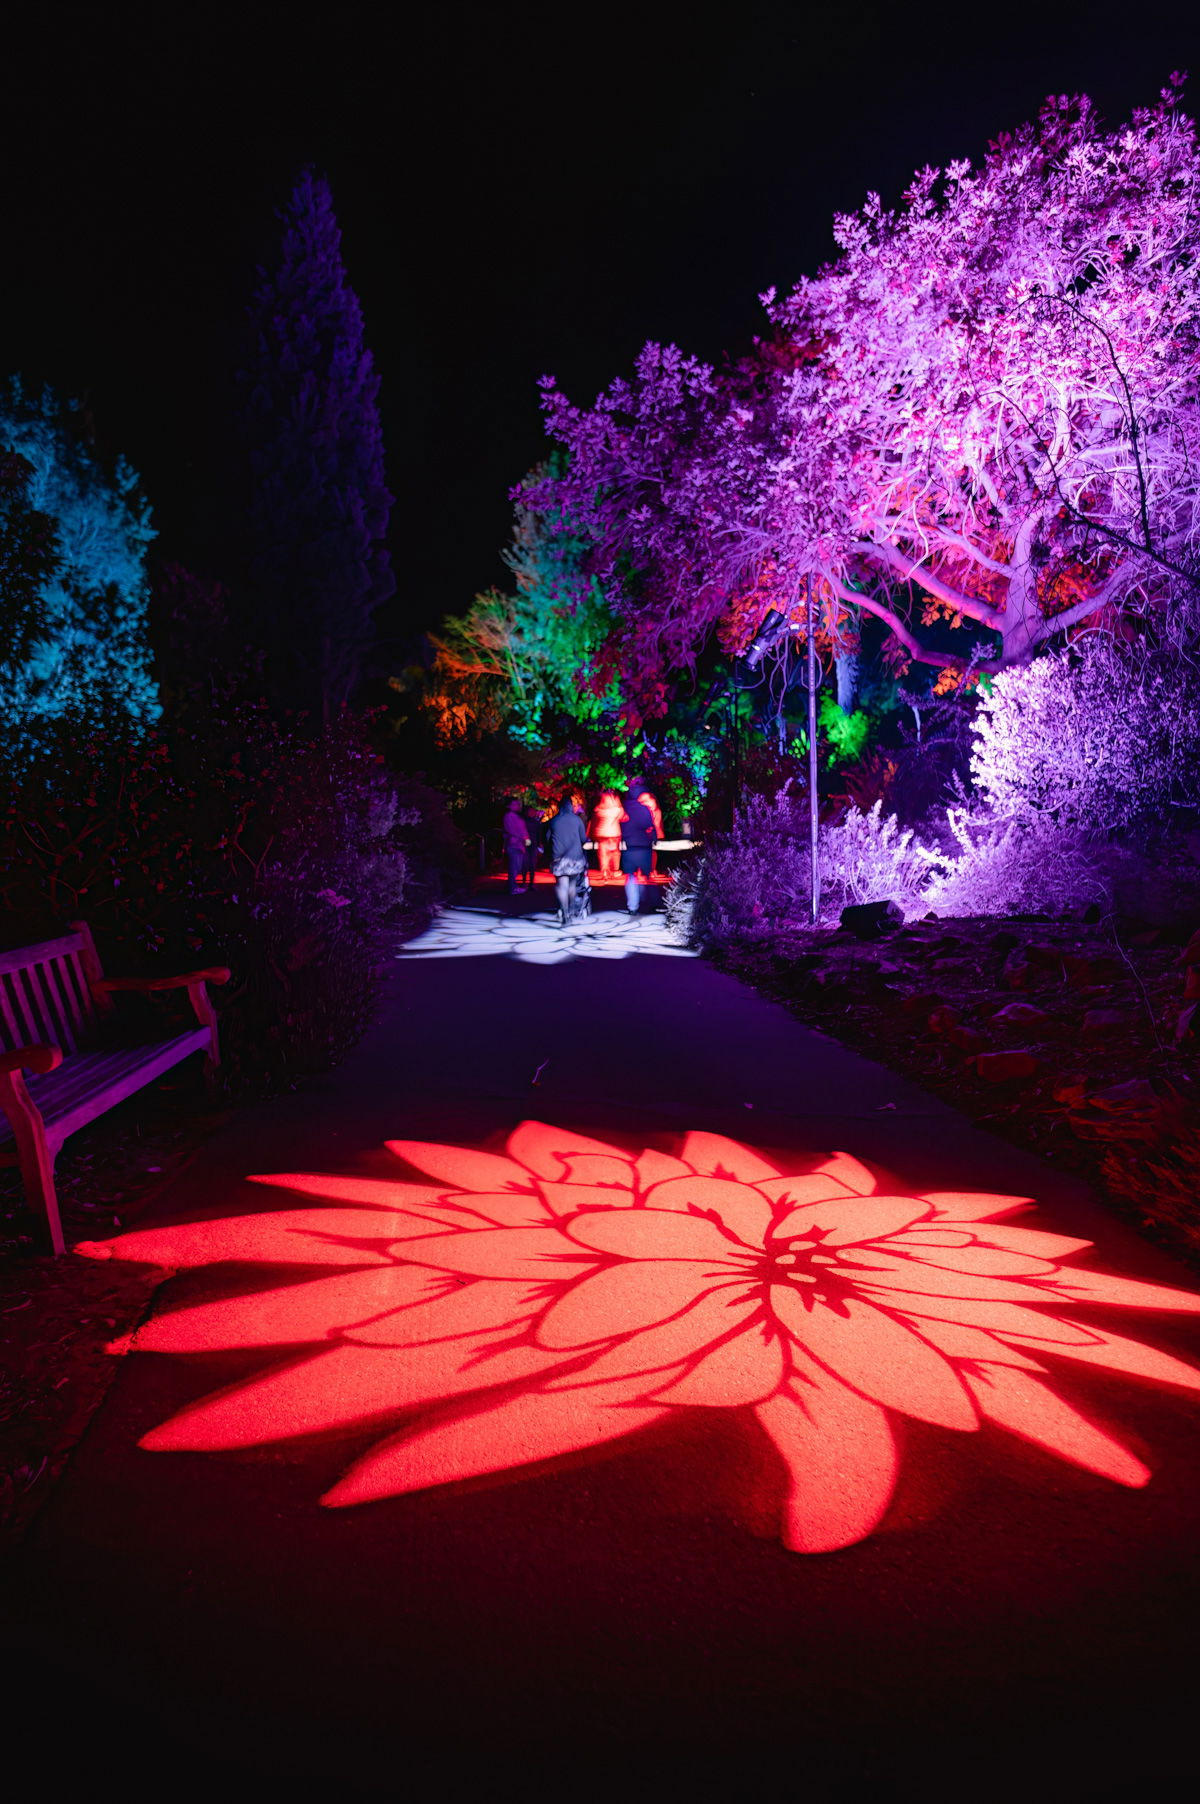 A nighttime park scene with a light shaped like a poinsettia flower projected on a paved path, and trees illuminated purple, red, blue, and green in the background.